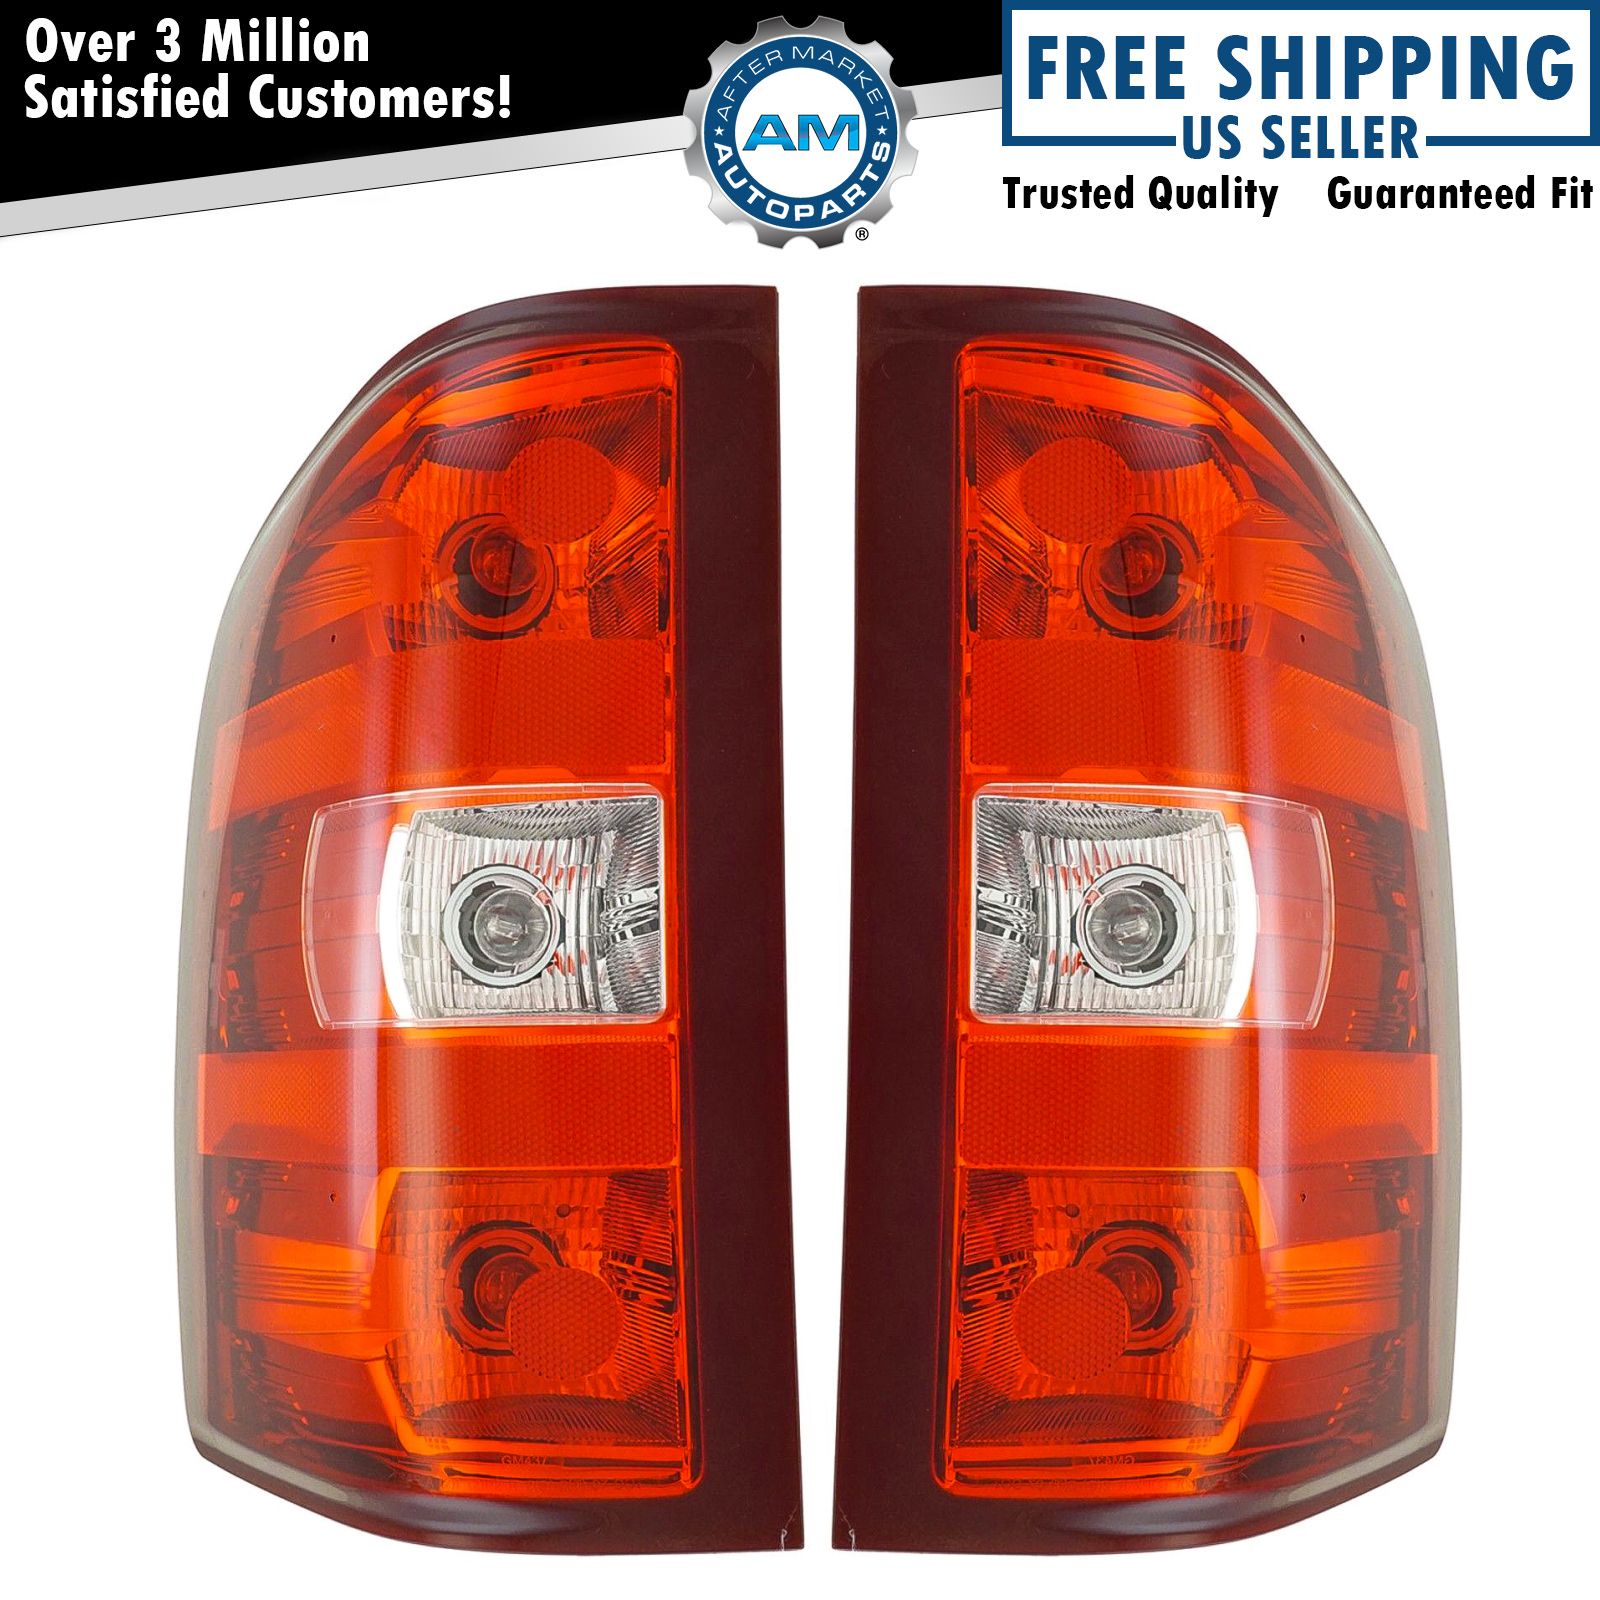 Tail Lights Taillamps Pair Set for 07-14 Chevy Silverado 1500 2500 GMC Sierra